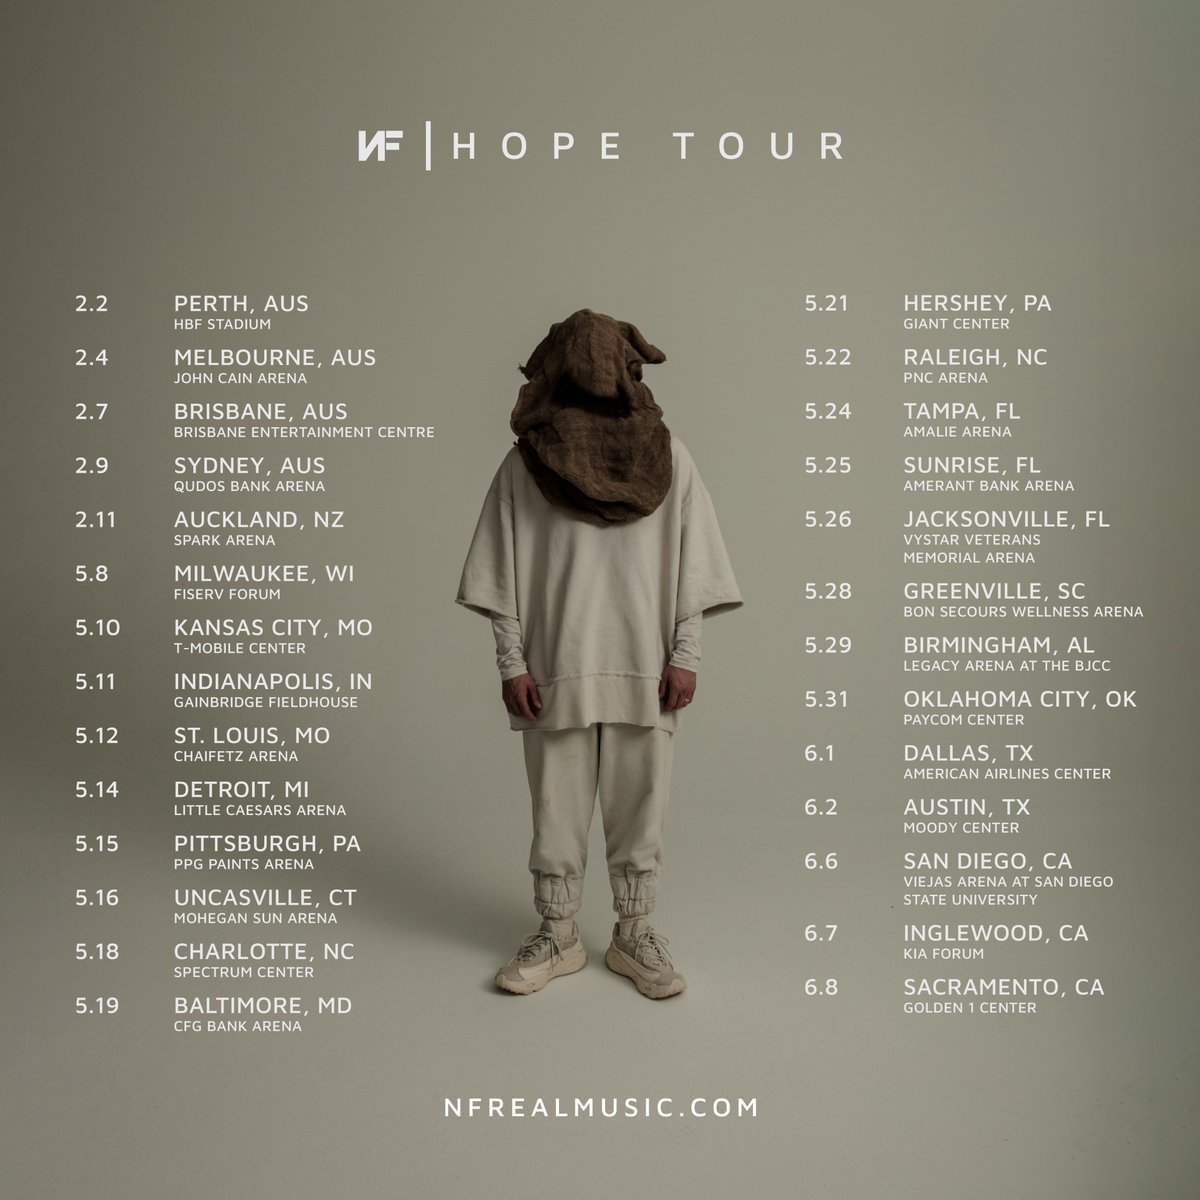 HOPE TOUR 2024. Get more info and register for first access to tickets at nfrealmusic.com/tour